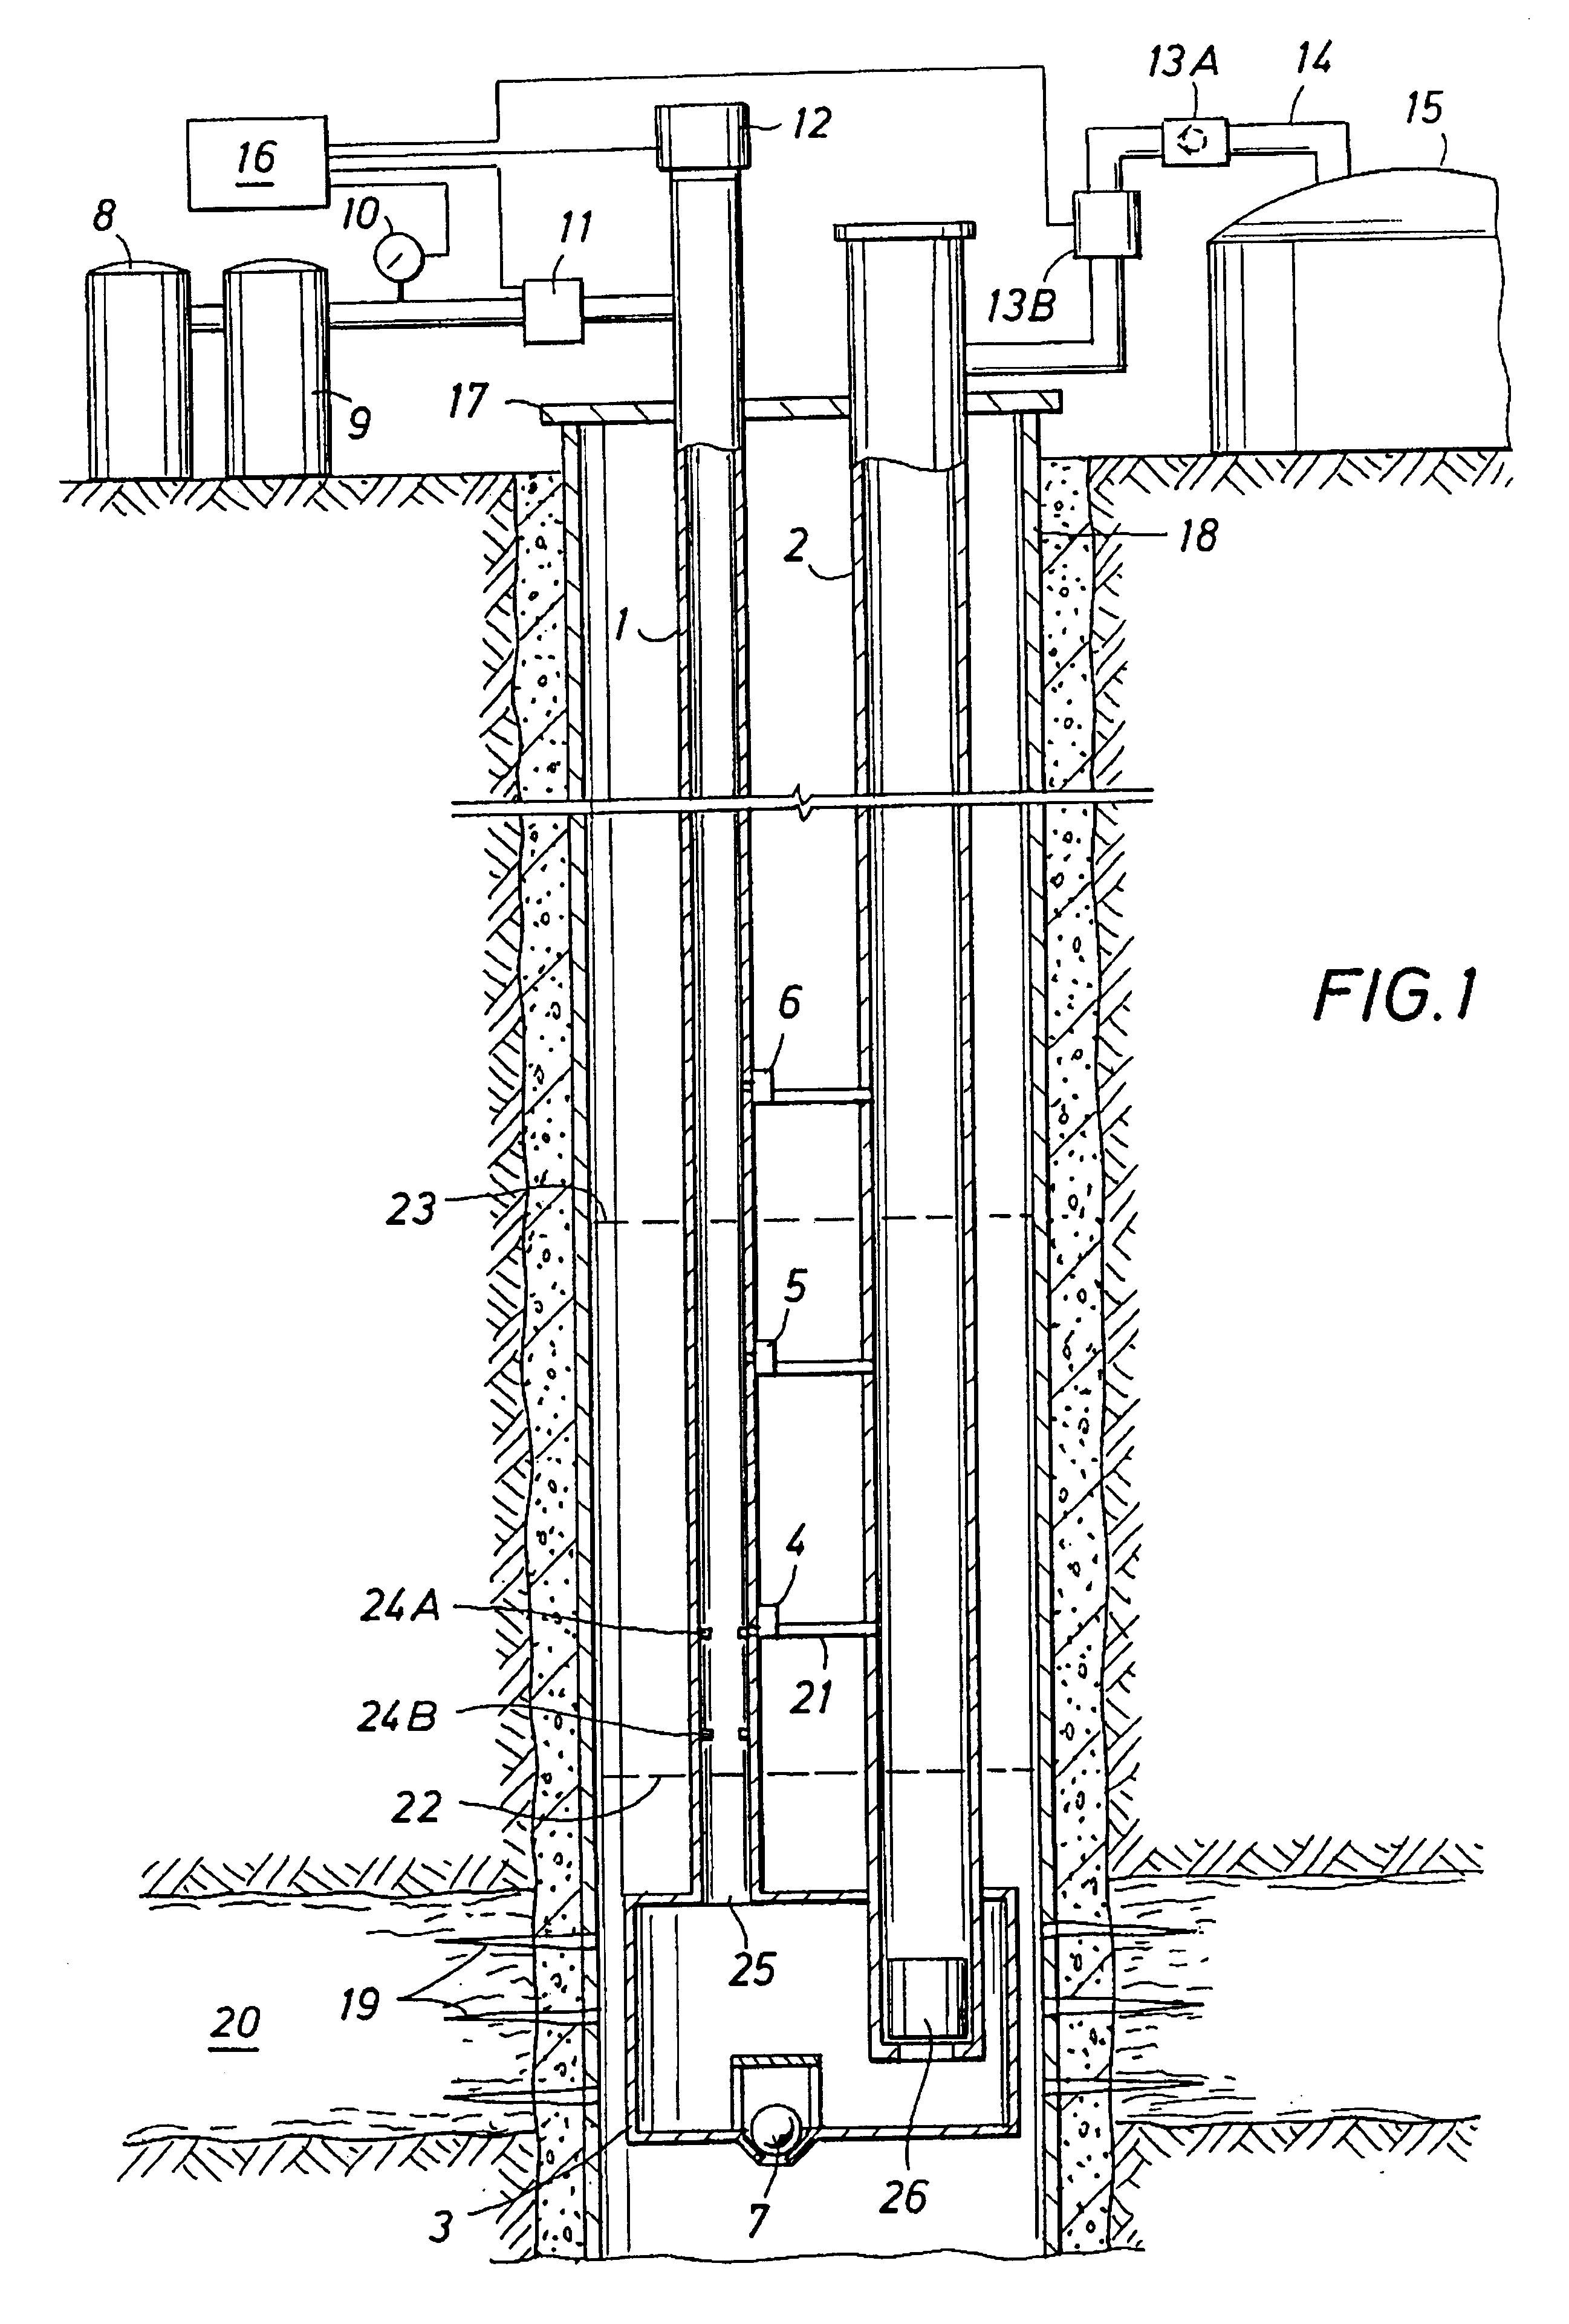 Method and apparatus for gas lift system for oil and gas wells